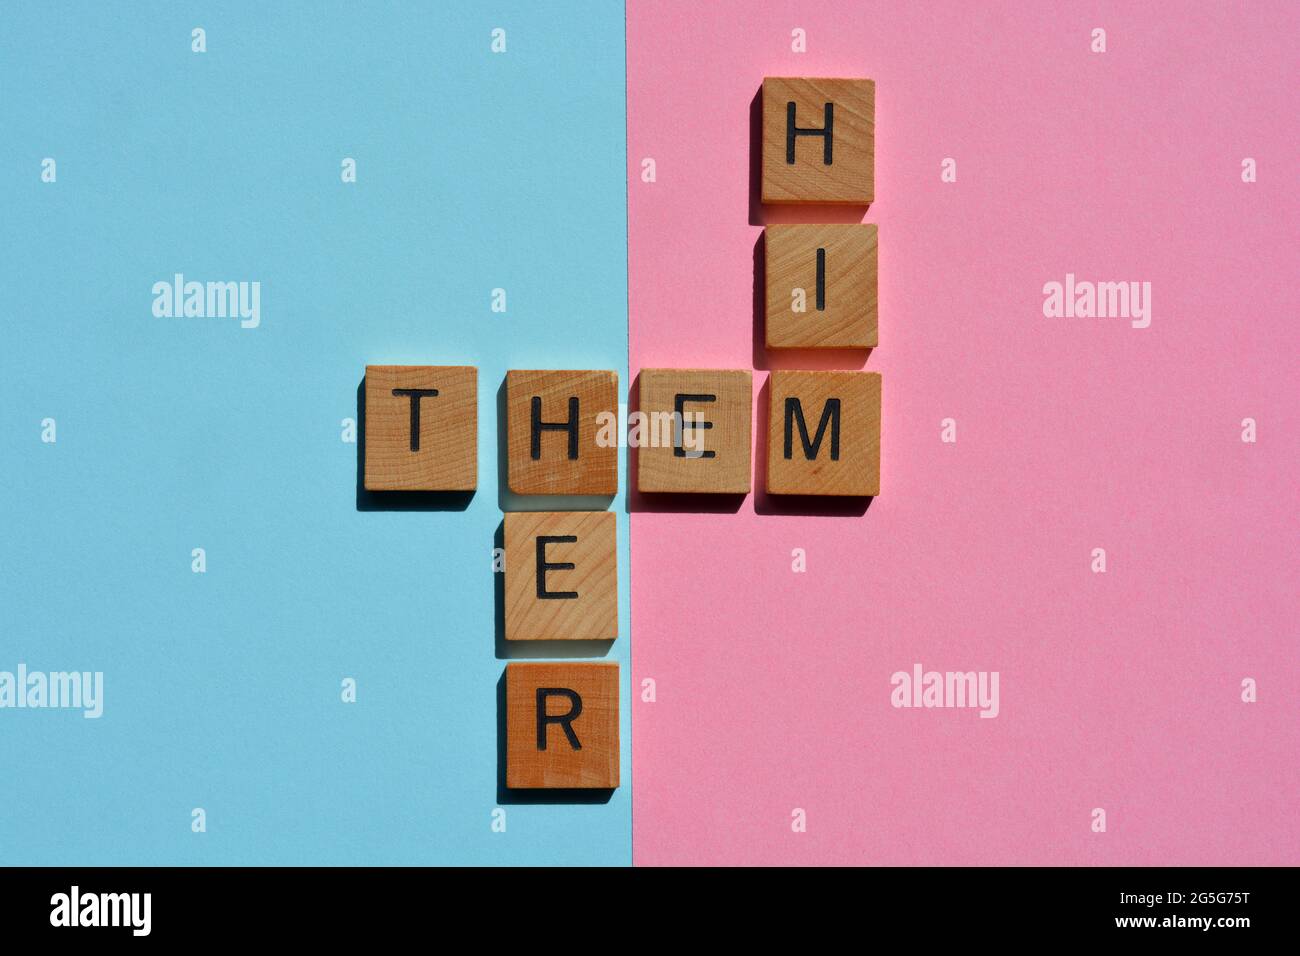 Him, Her, Them, gender pronouns in crossword form on pink and blue background Stock Photo